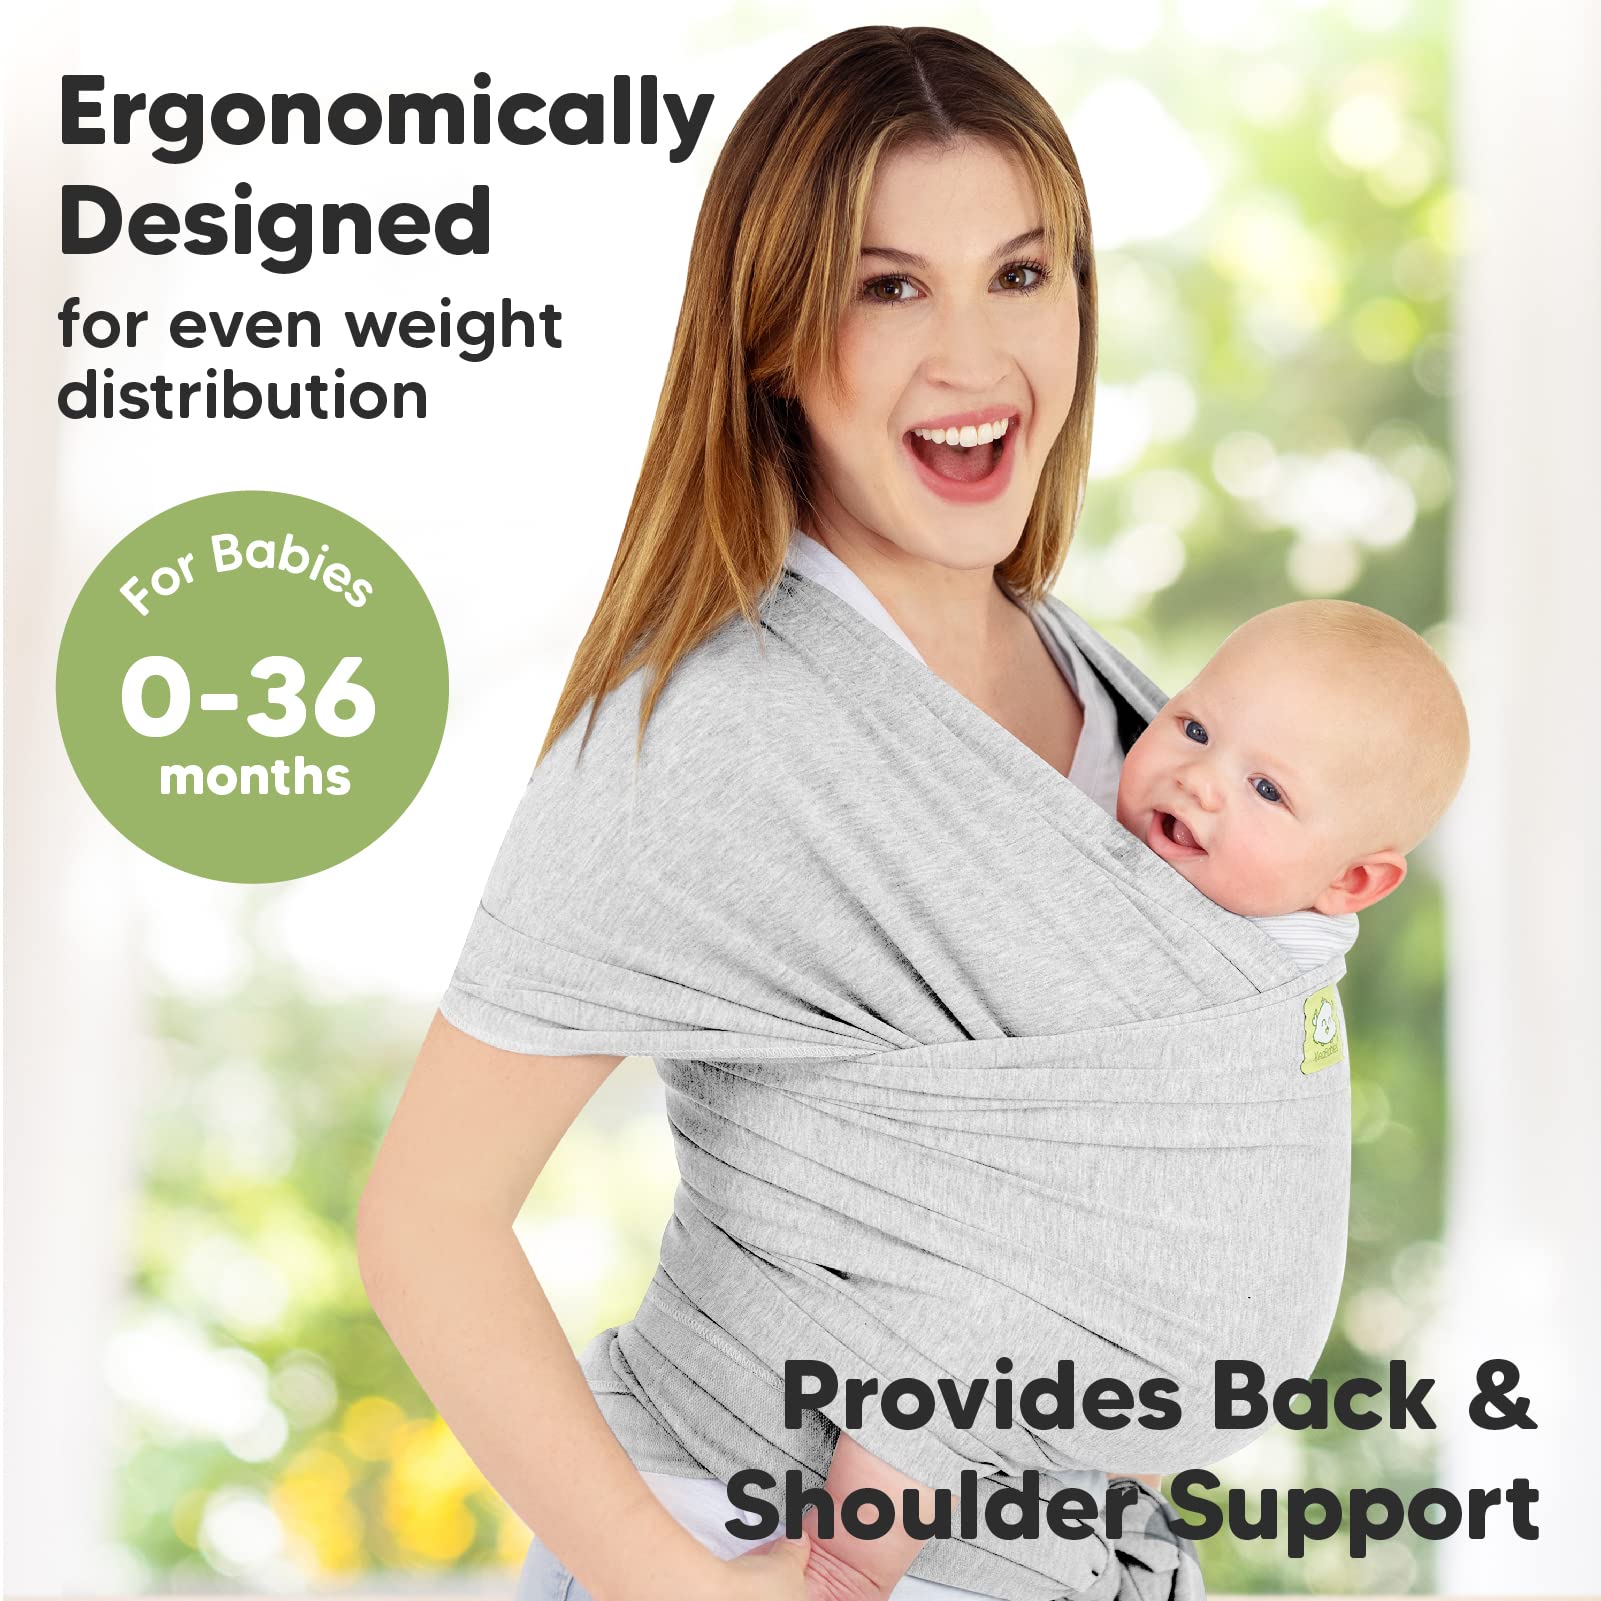 KeaBabies Baby Wrap Carrier and Baby Diaper Caddy Organizer - All in 1 Original Breathable Baby Sling - Large Baby Organizer - Lightweight,Hands Free Baby Carrier Sling - Large Baby Organizer